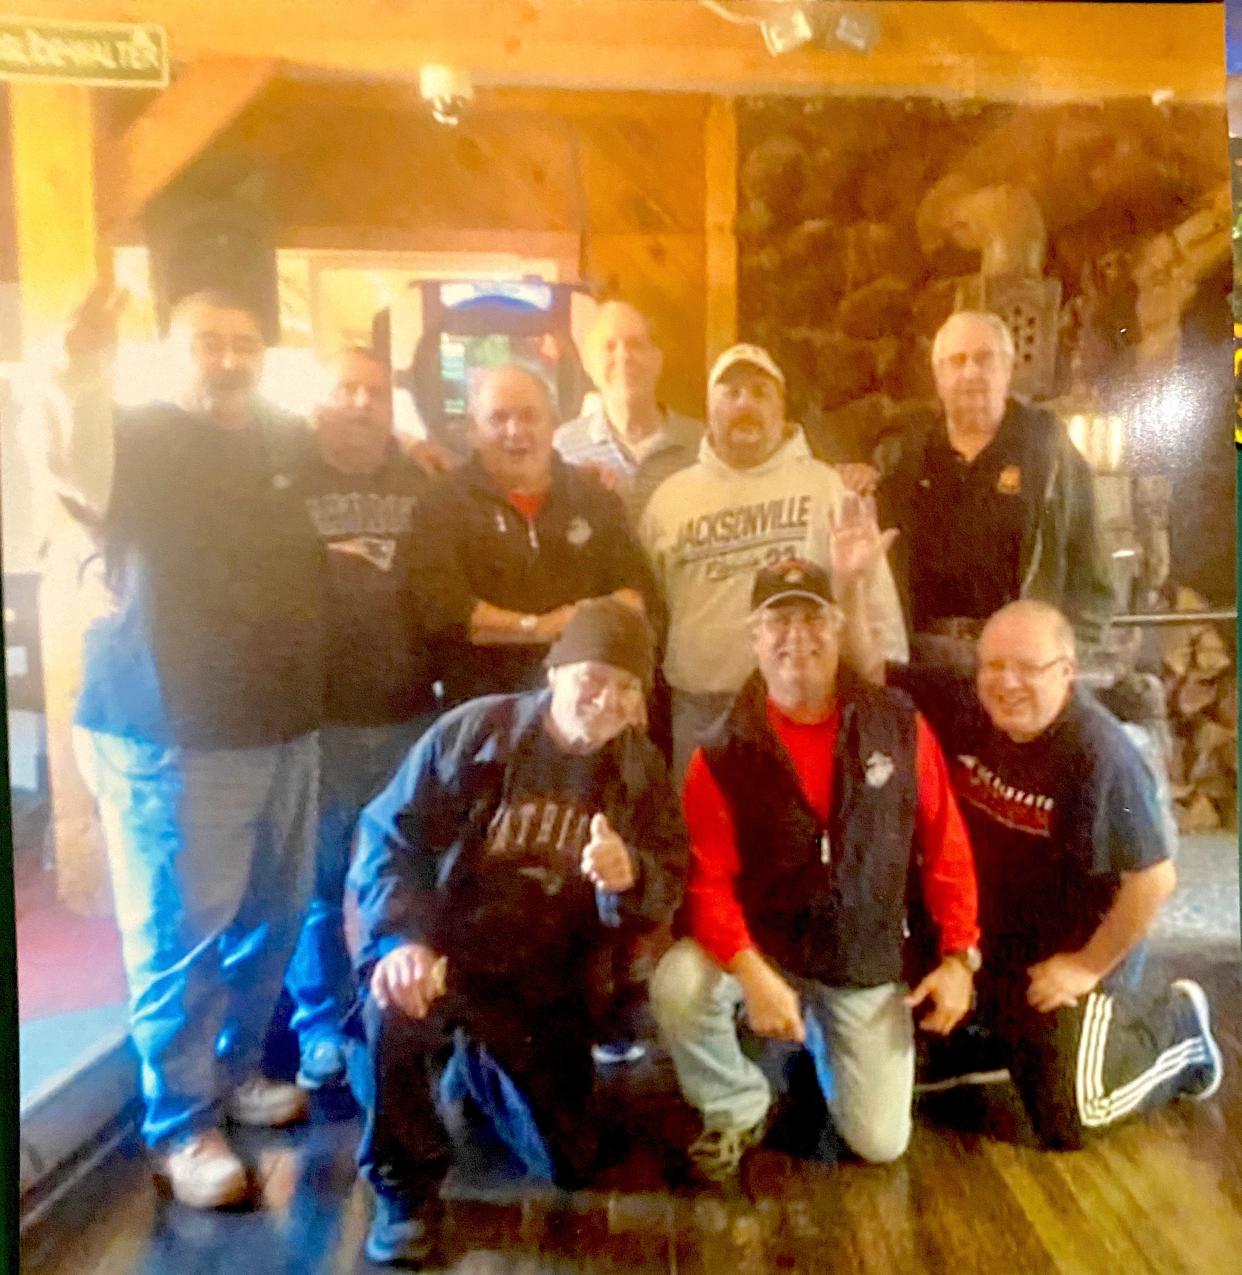 Ken Lewis is pictured at top right with his poker buddies on Veterans Day 2020, a month before his death.